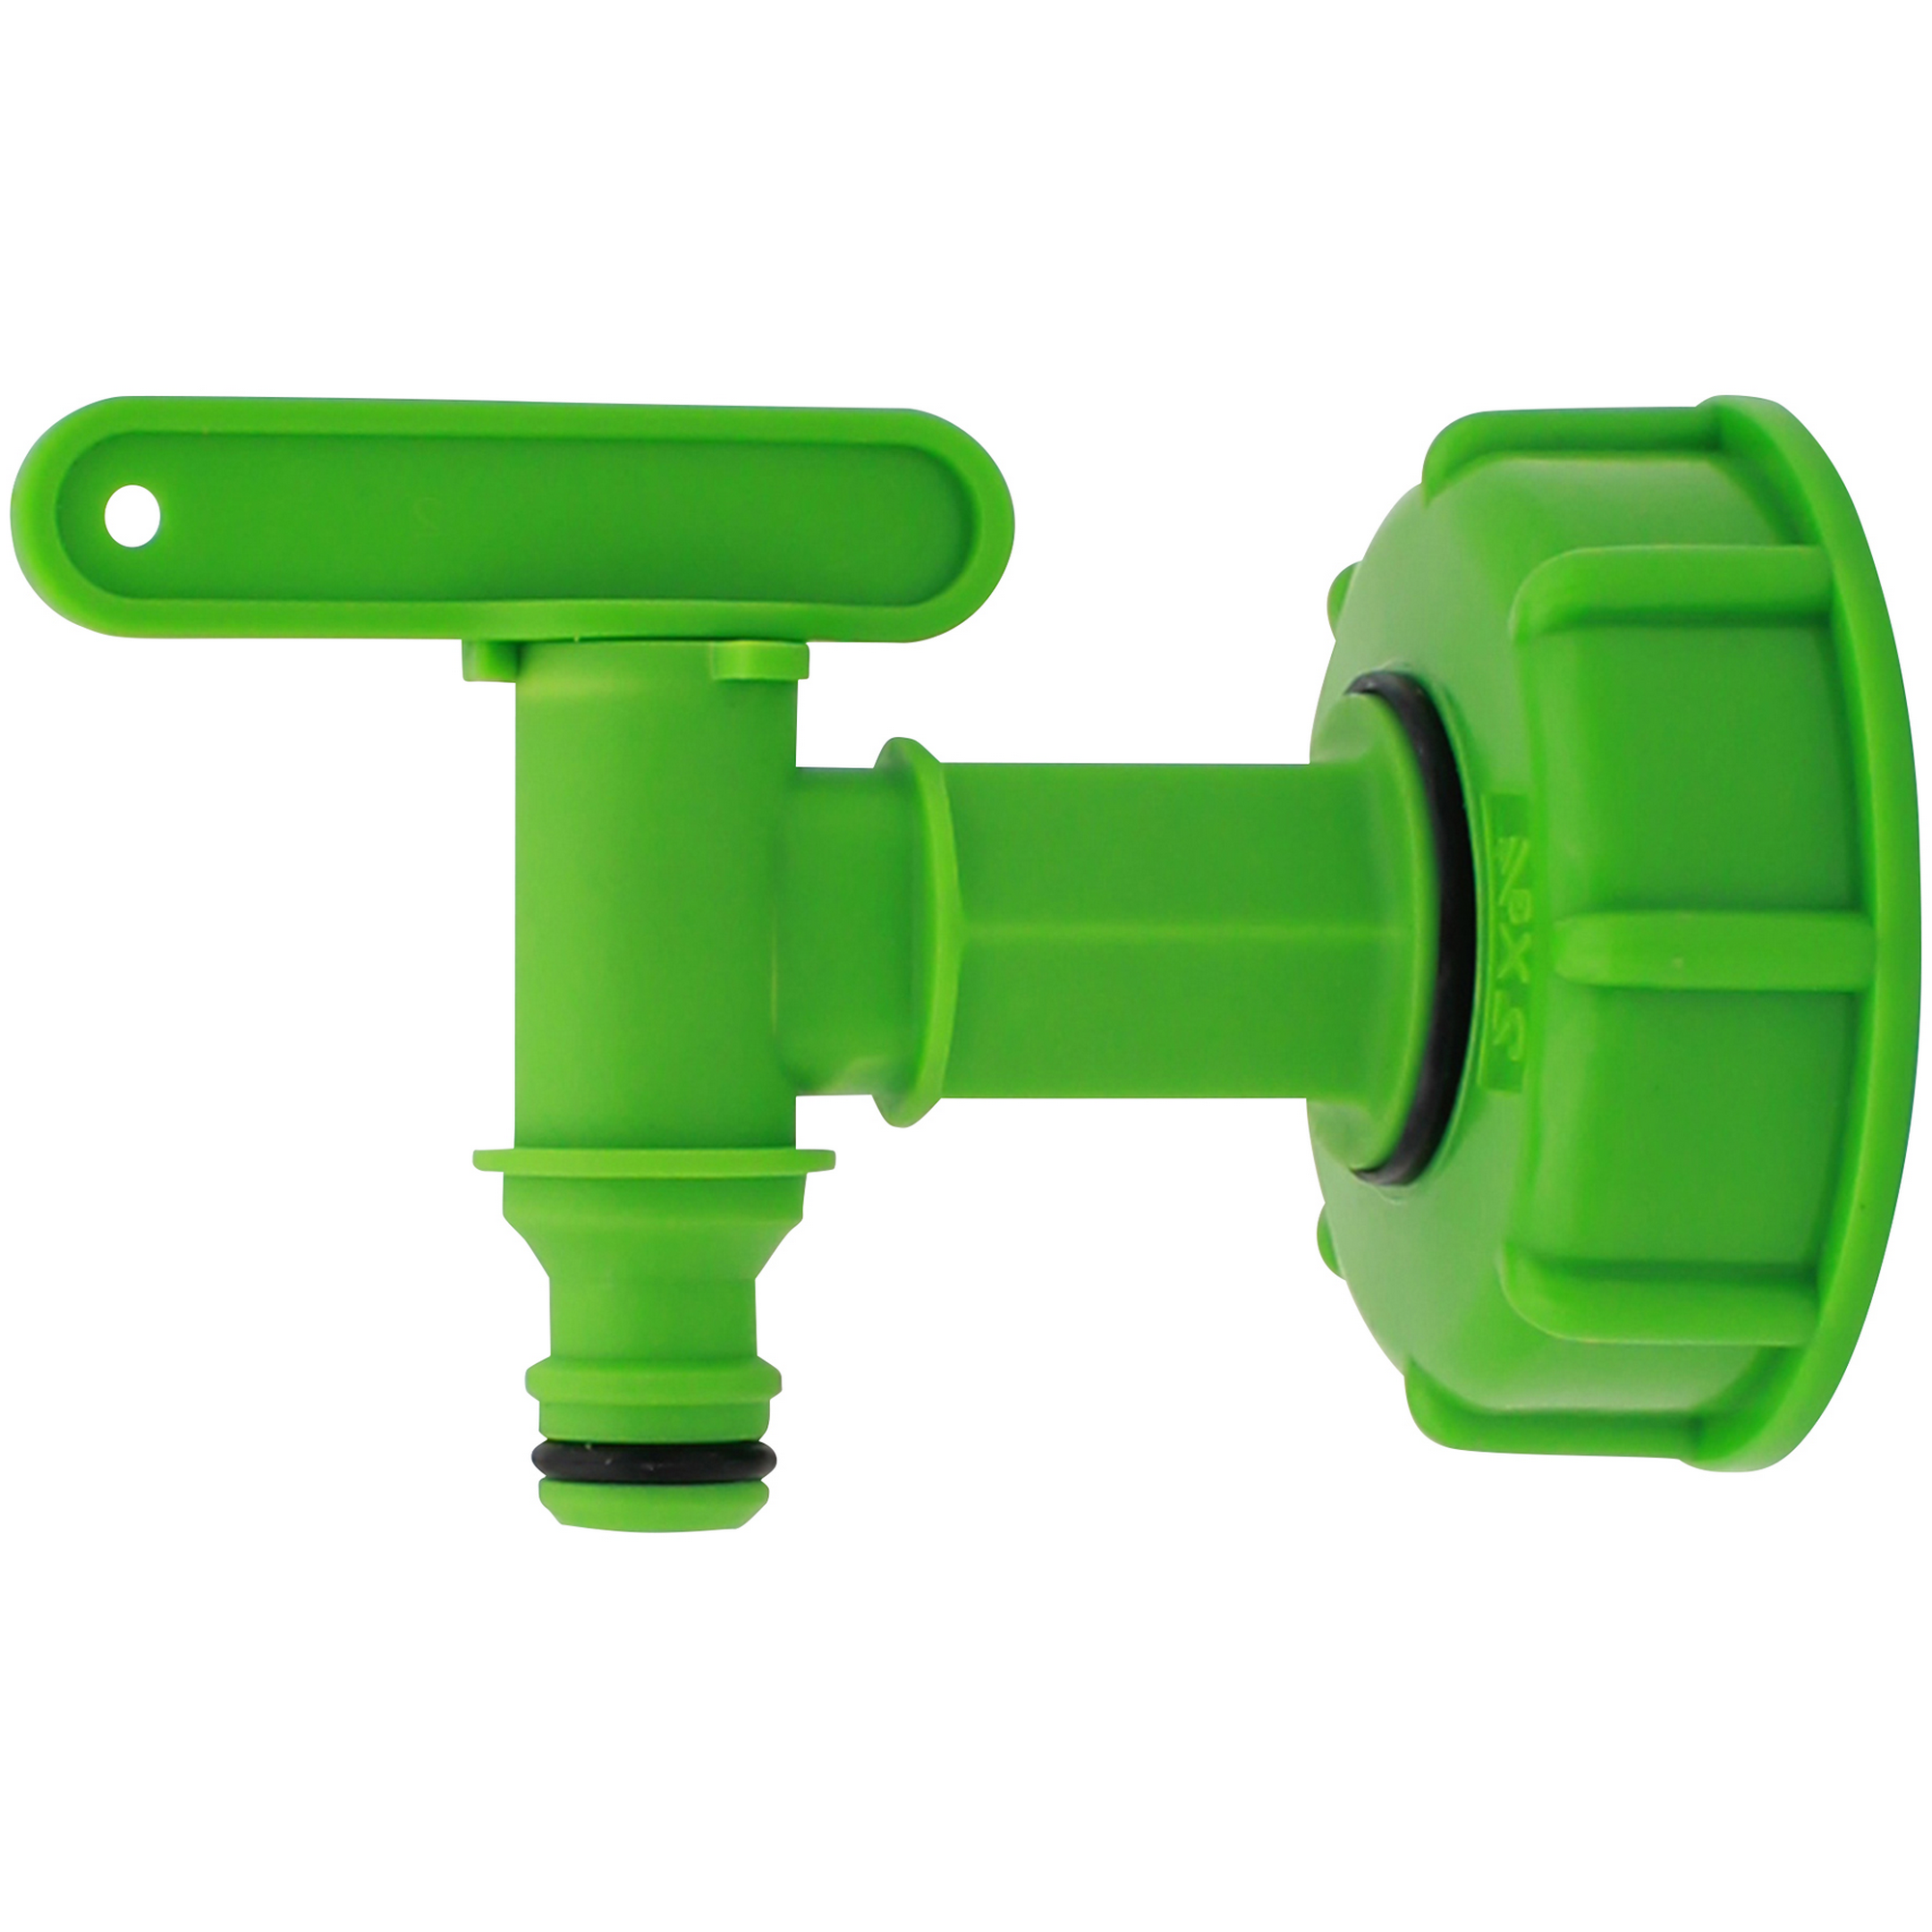 IBC-Adapter mit Wasserhahn 2 Zoll + product picture